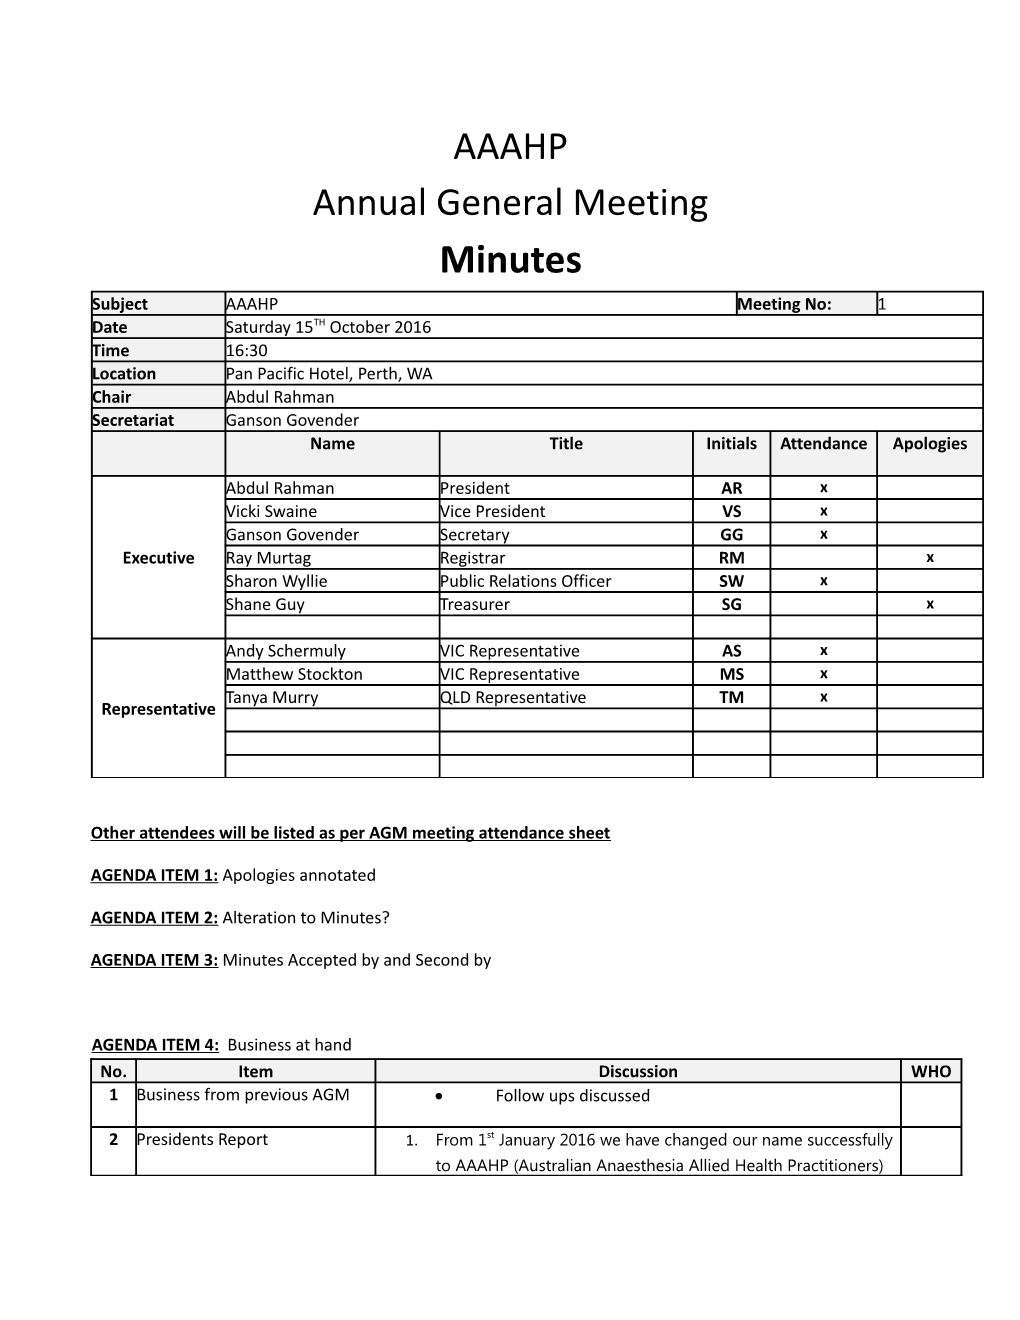 Other Attendees Will Be Listed As Per AGM Meeting Attendance Sheet